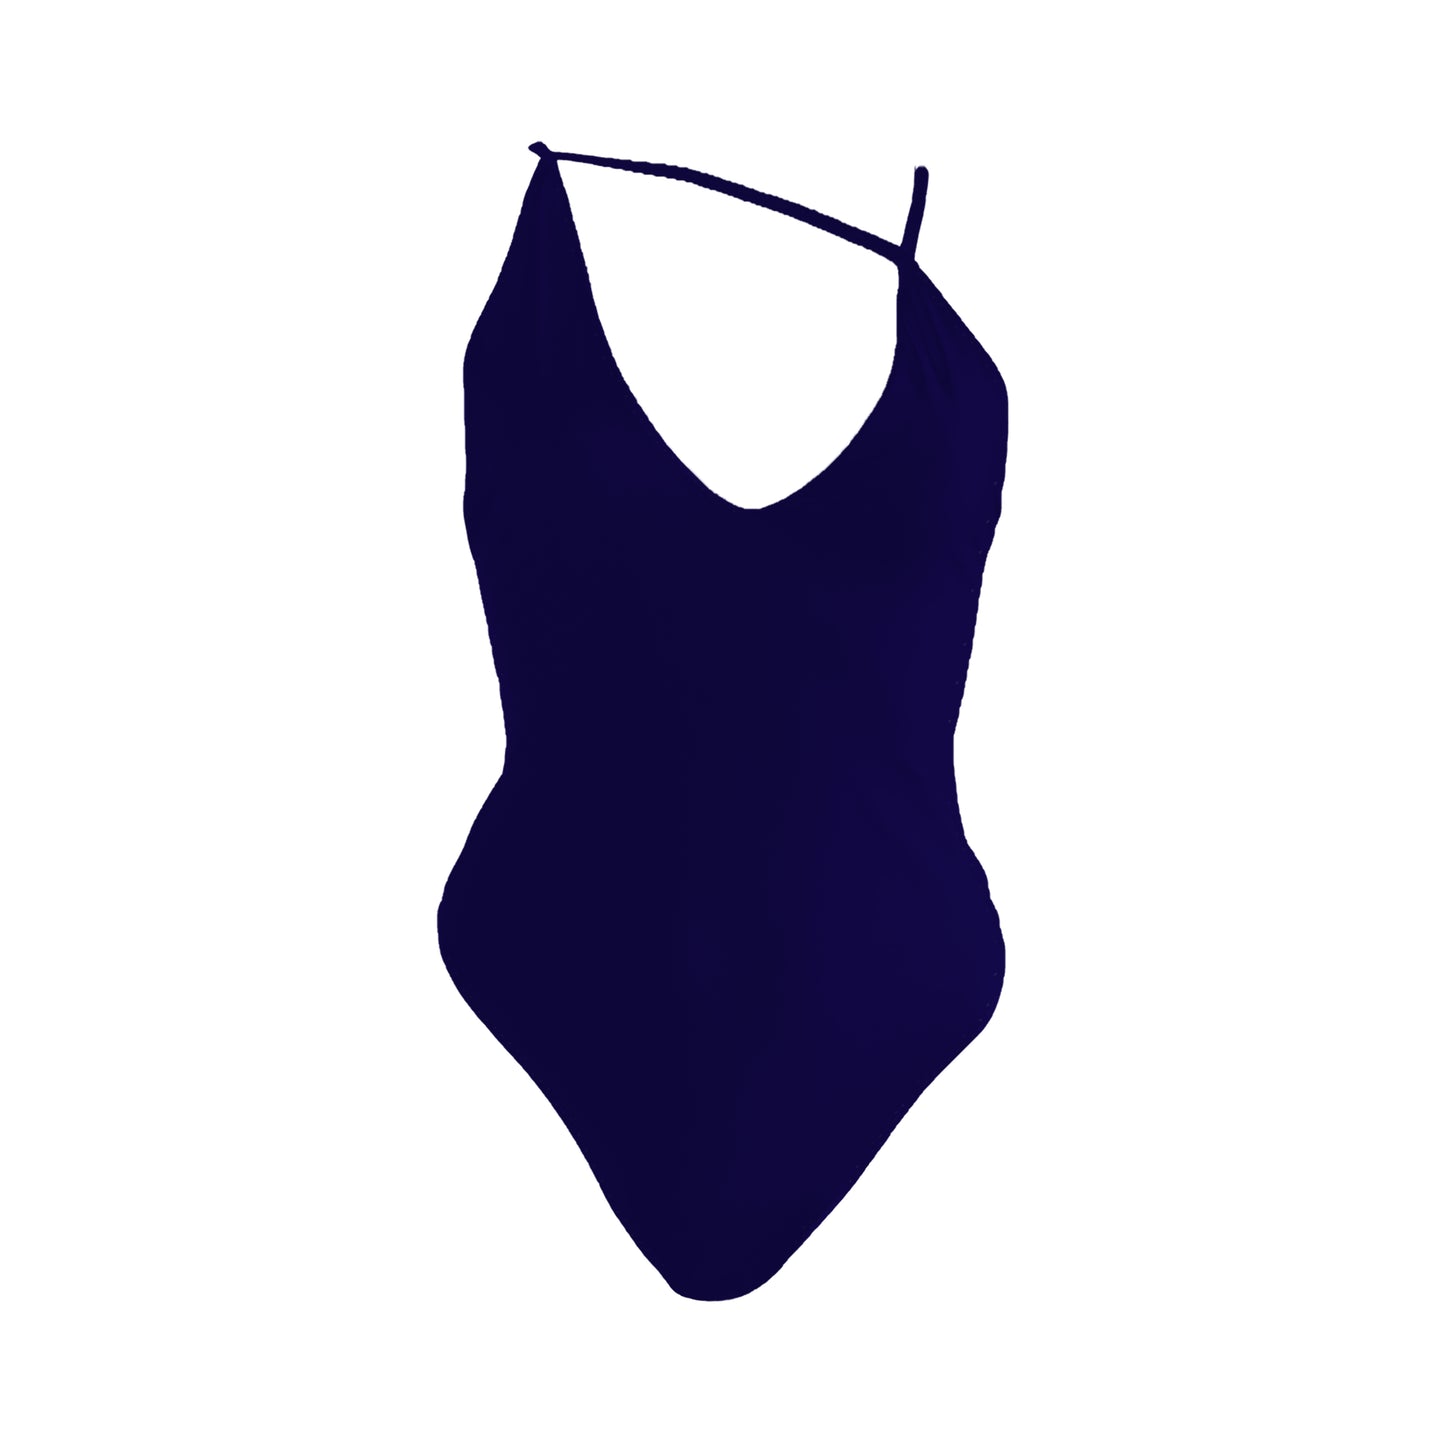 Midnight navy Asymmetric plunging v-neck one piece swimsuit with strap across connecting the front straps, high cut legs, and cheeky bum coverage.